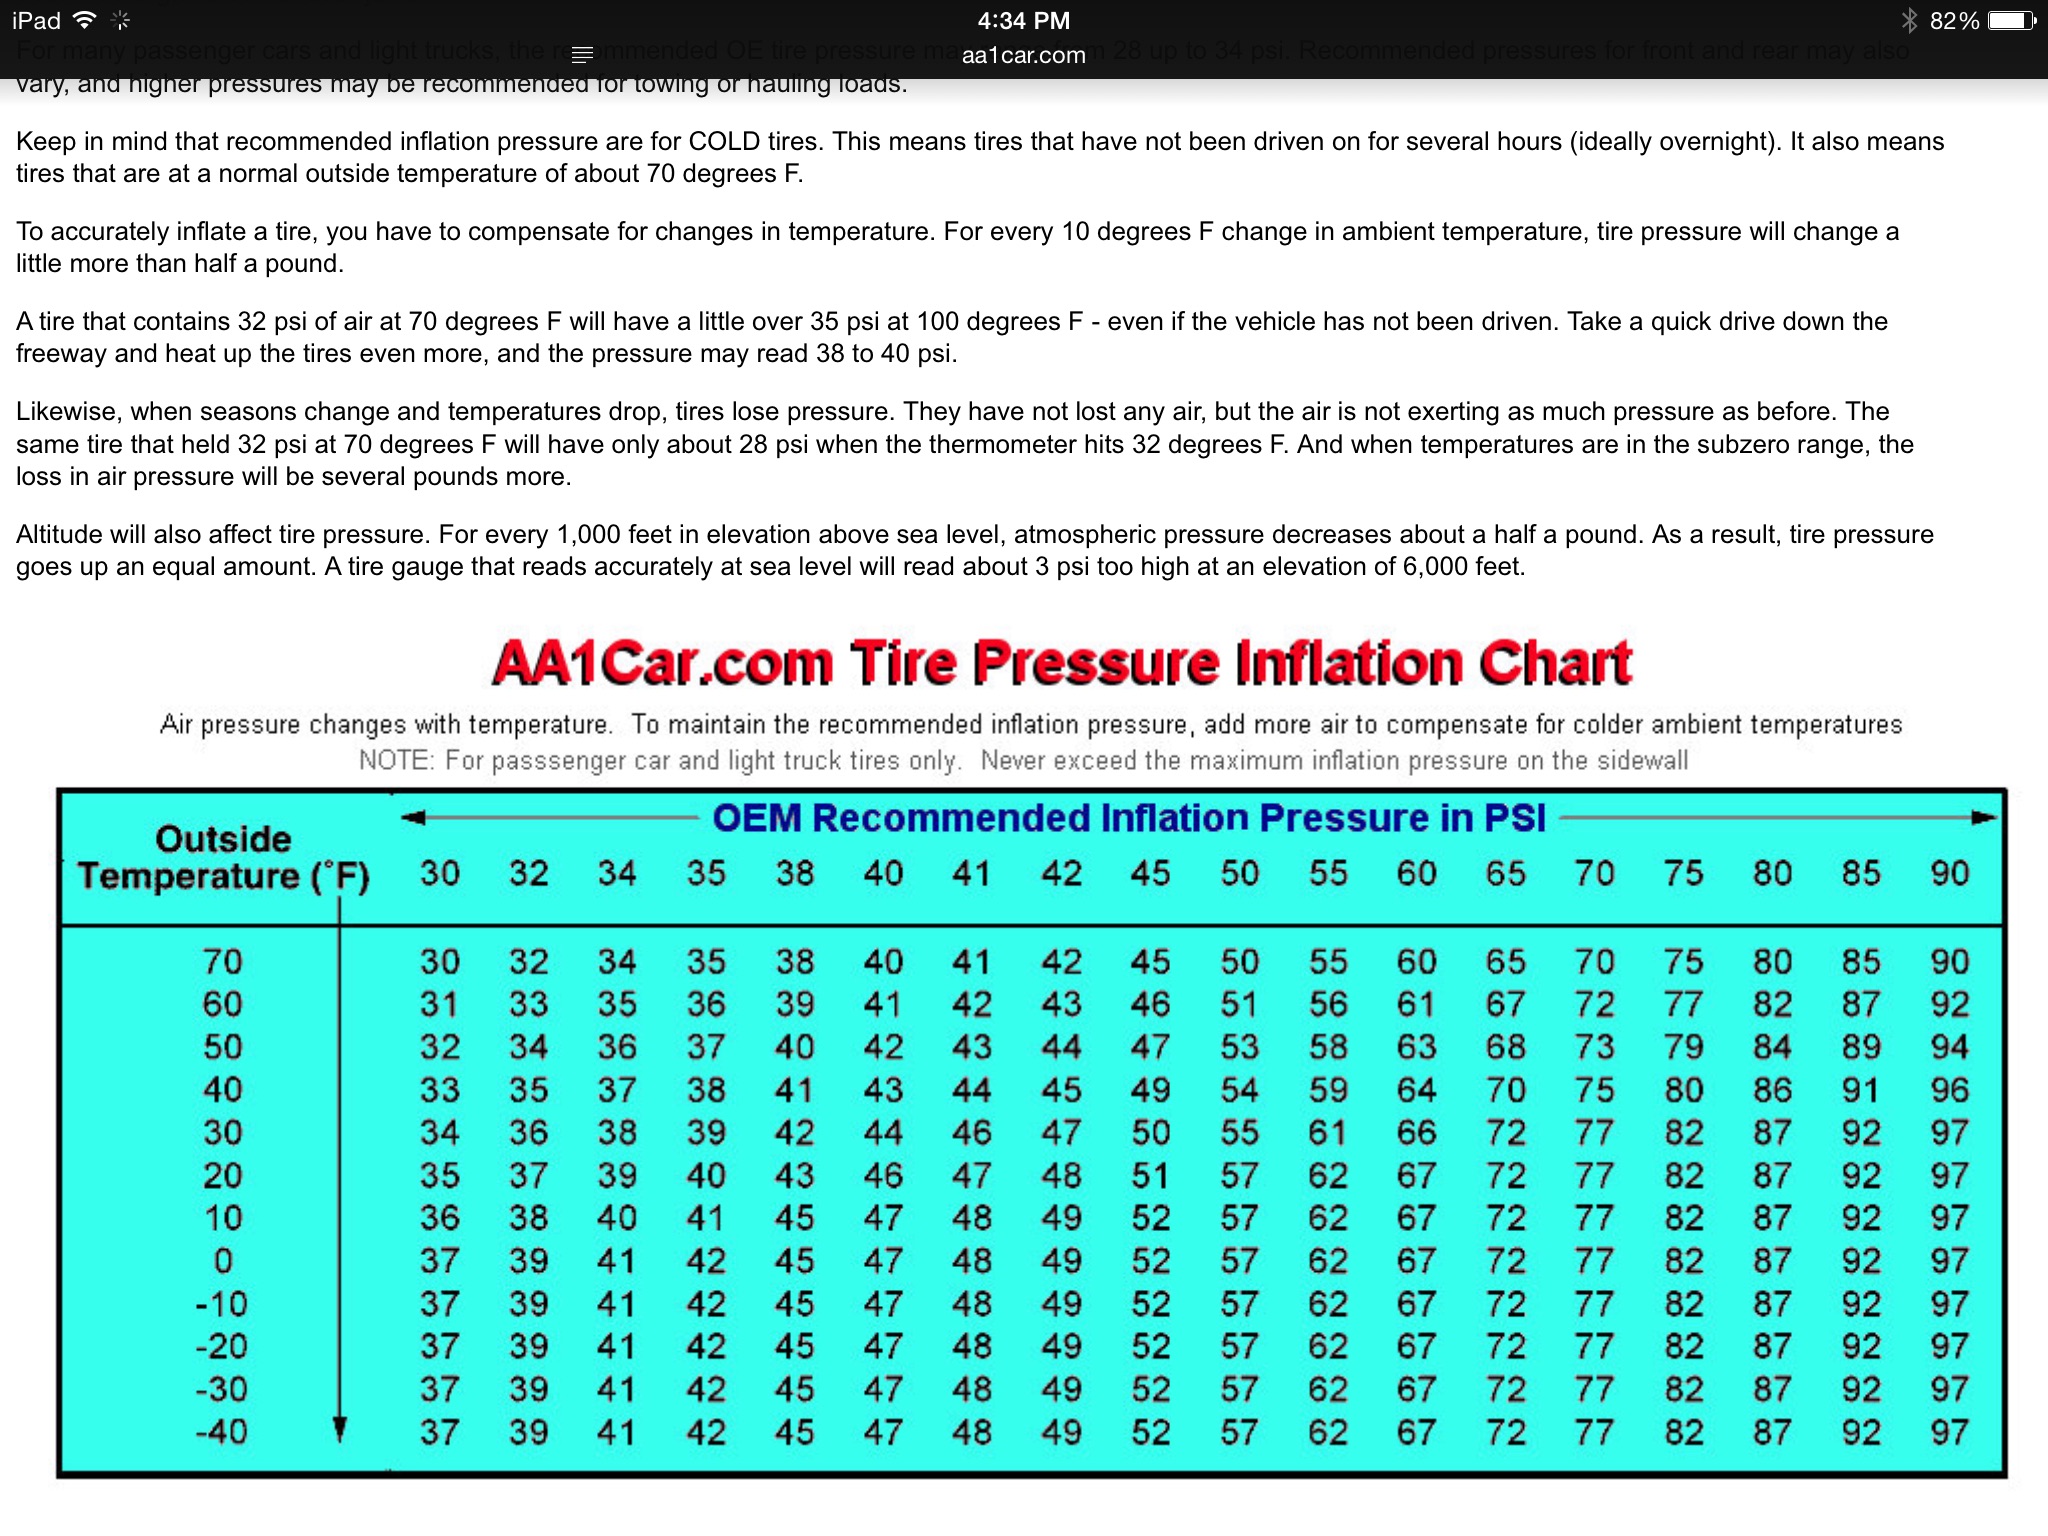 Tire Inflation Pressure Chart